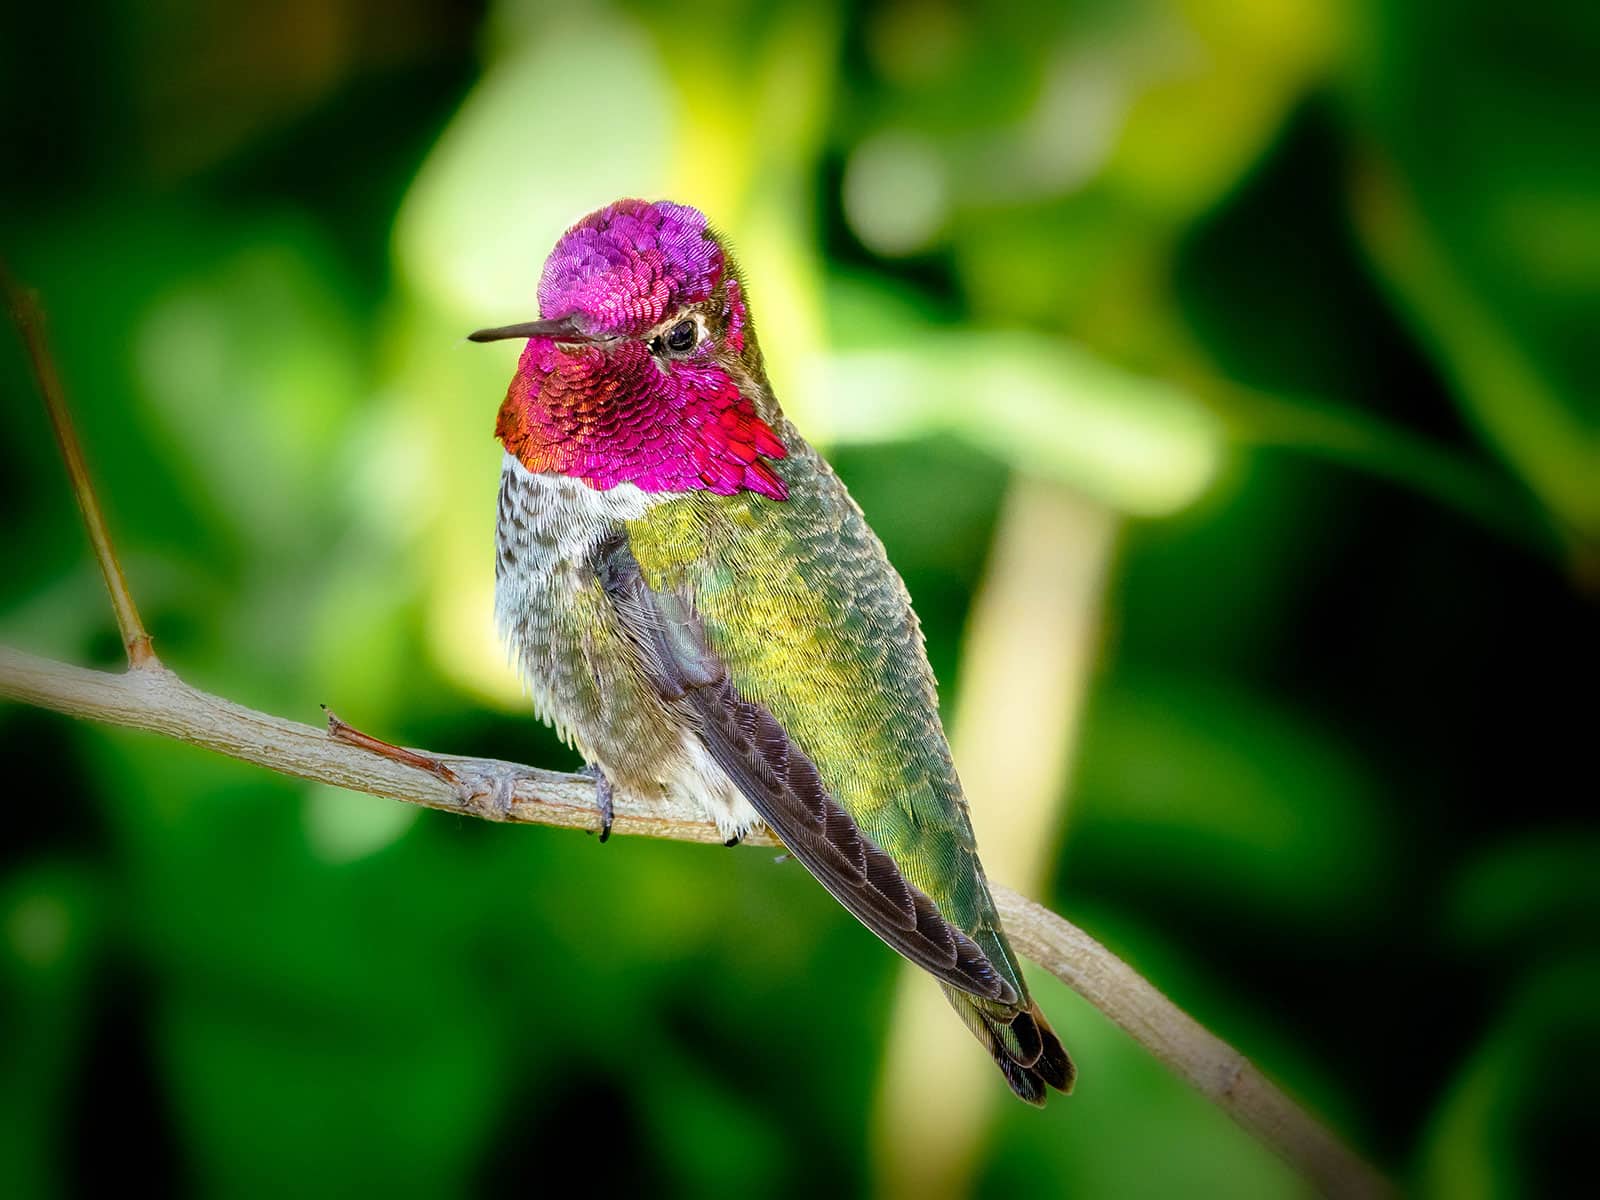 Anna's hummingbird perched on a tree branch